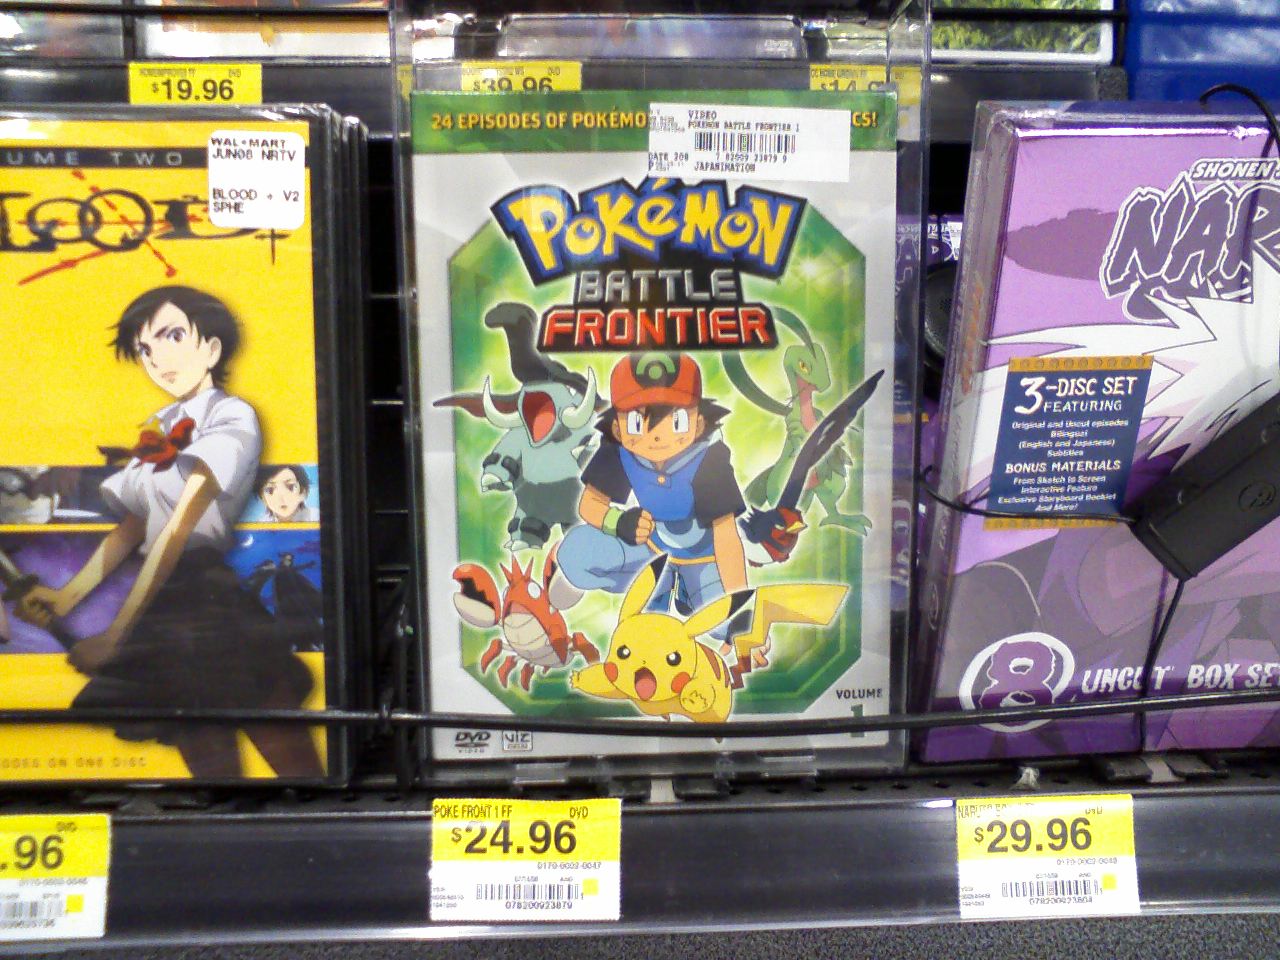 Pokemon Battle Frontier DVD at Wal-Mart